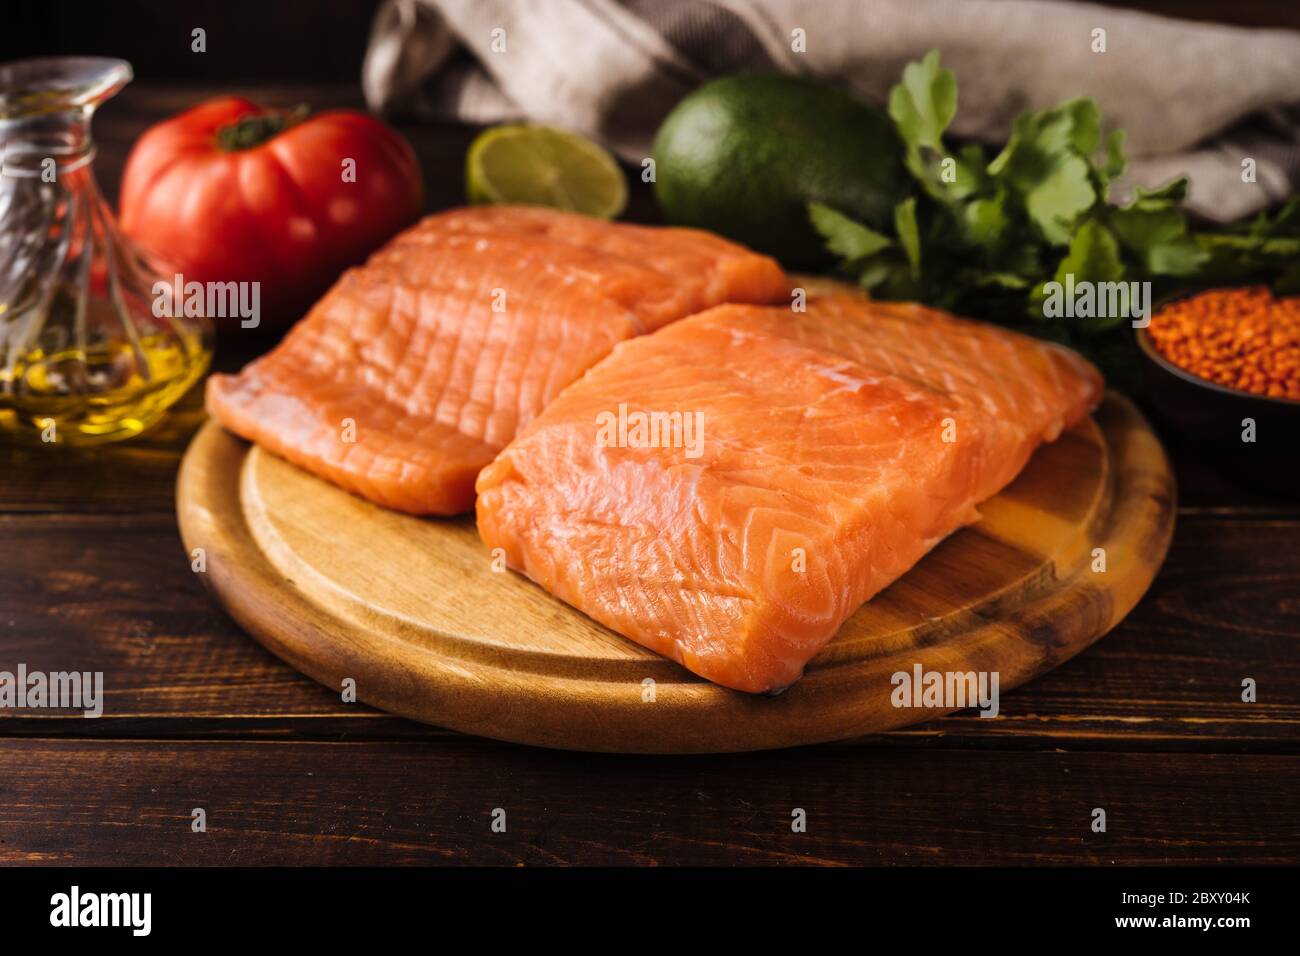 Close up of salmon fillet around healthy diet food products Stock Photo